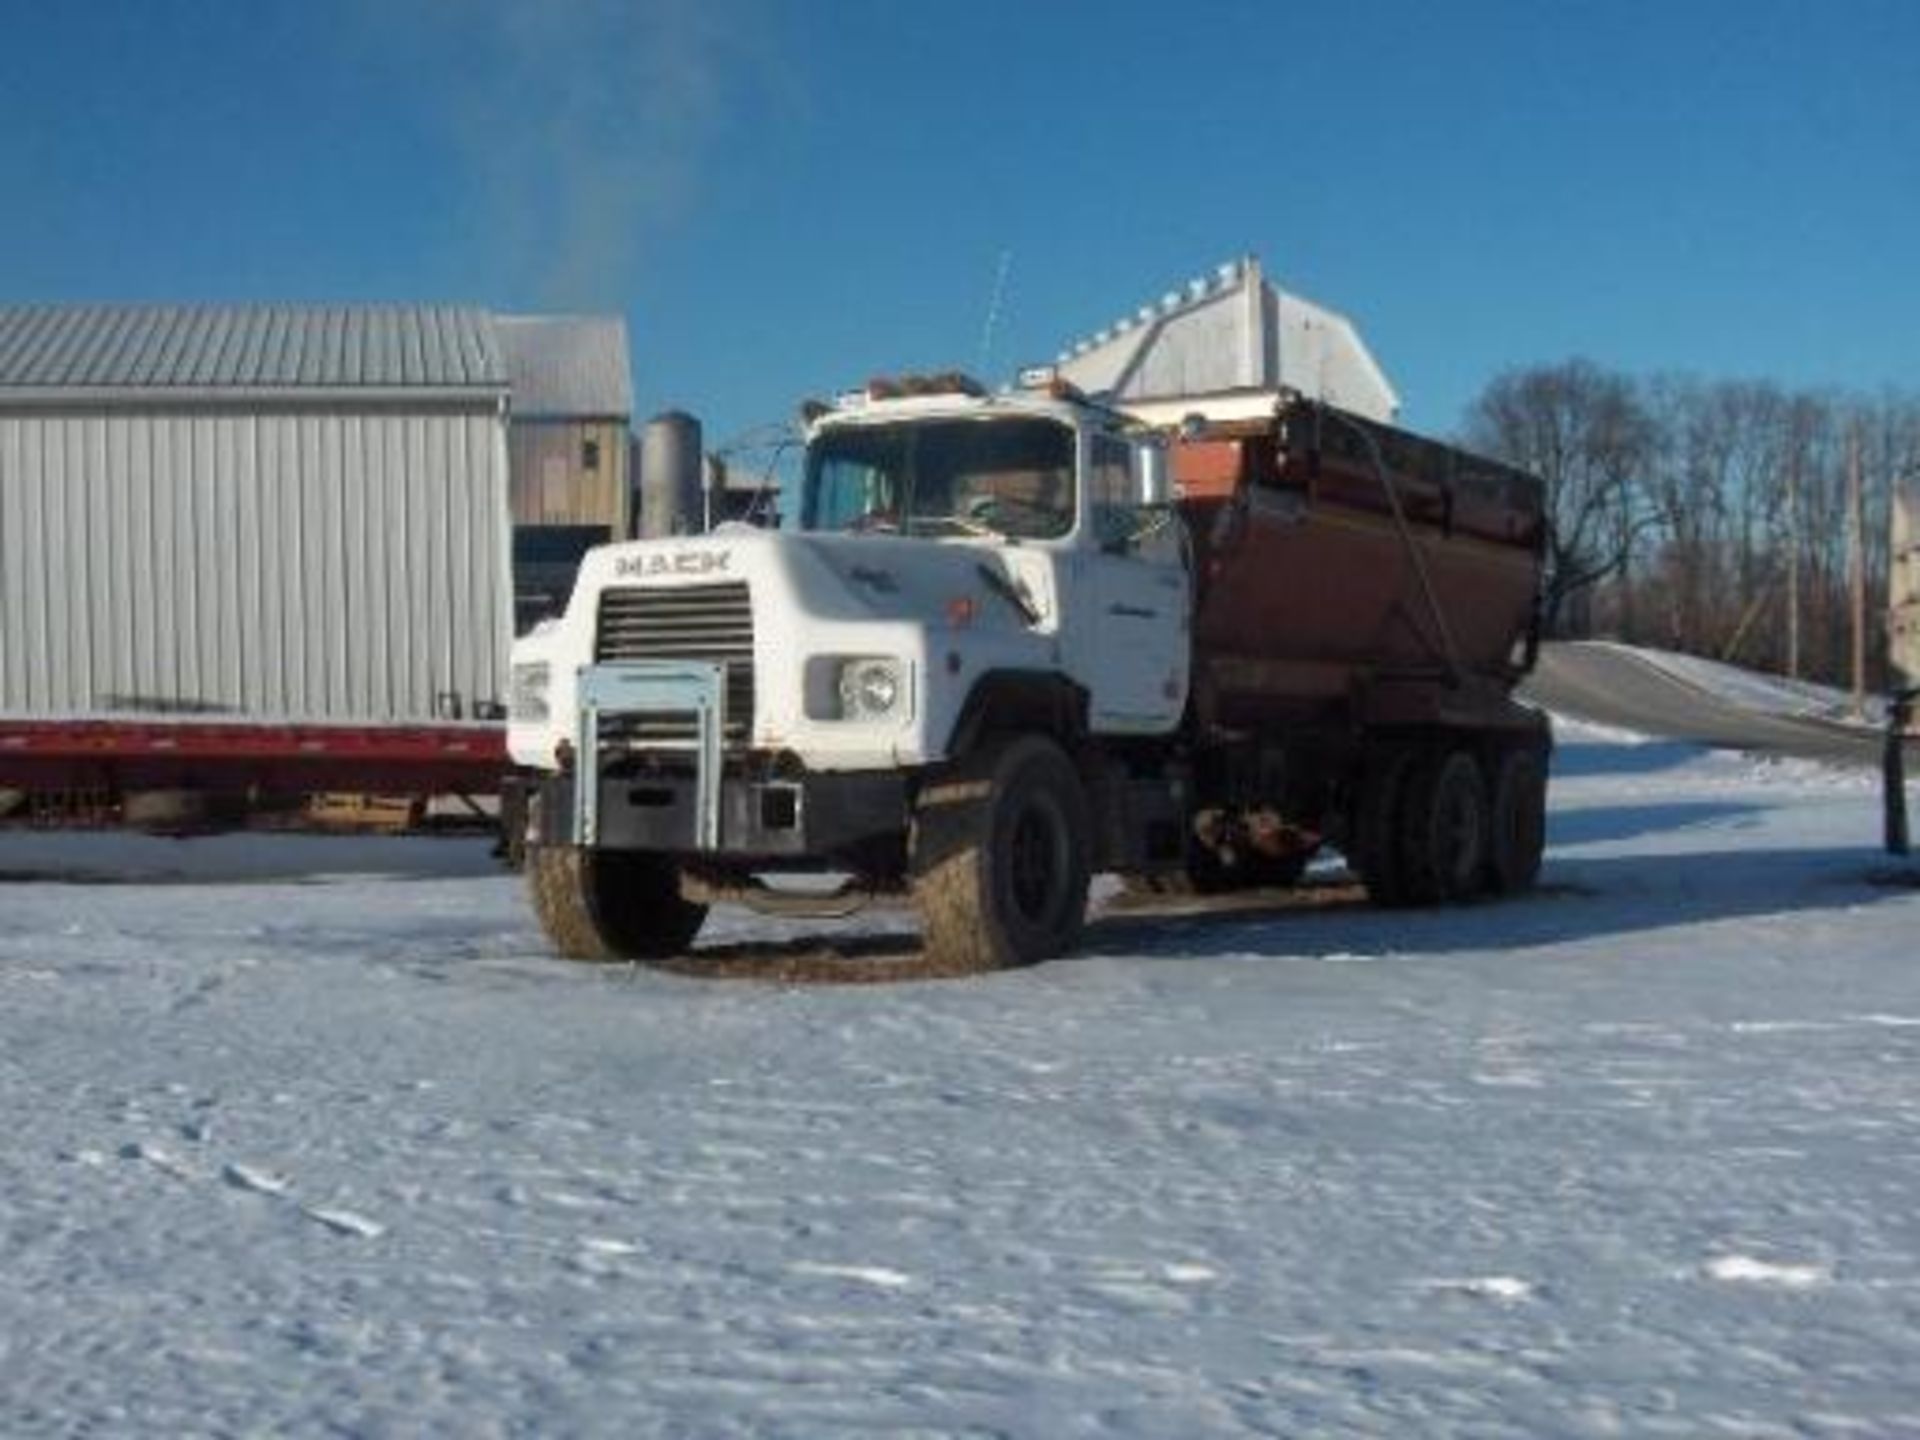 Mack DM 965 1989 model 300 with recent ($12,000+) engine overhaul and Lo hole trans, and # 5570 Myer - Image 6 of 14